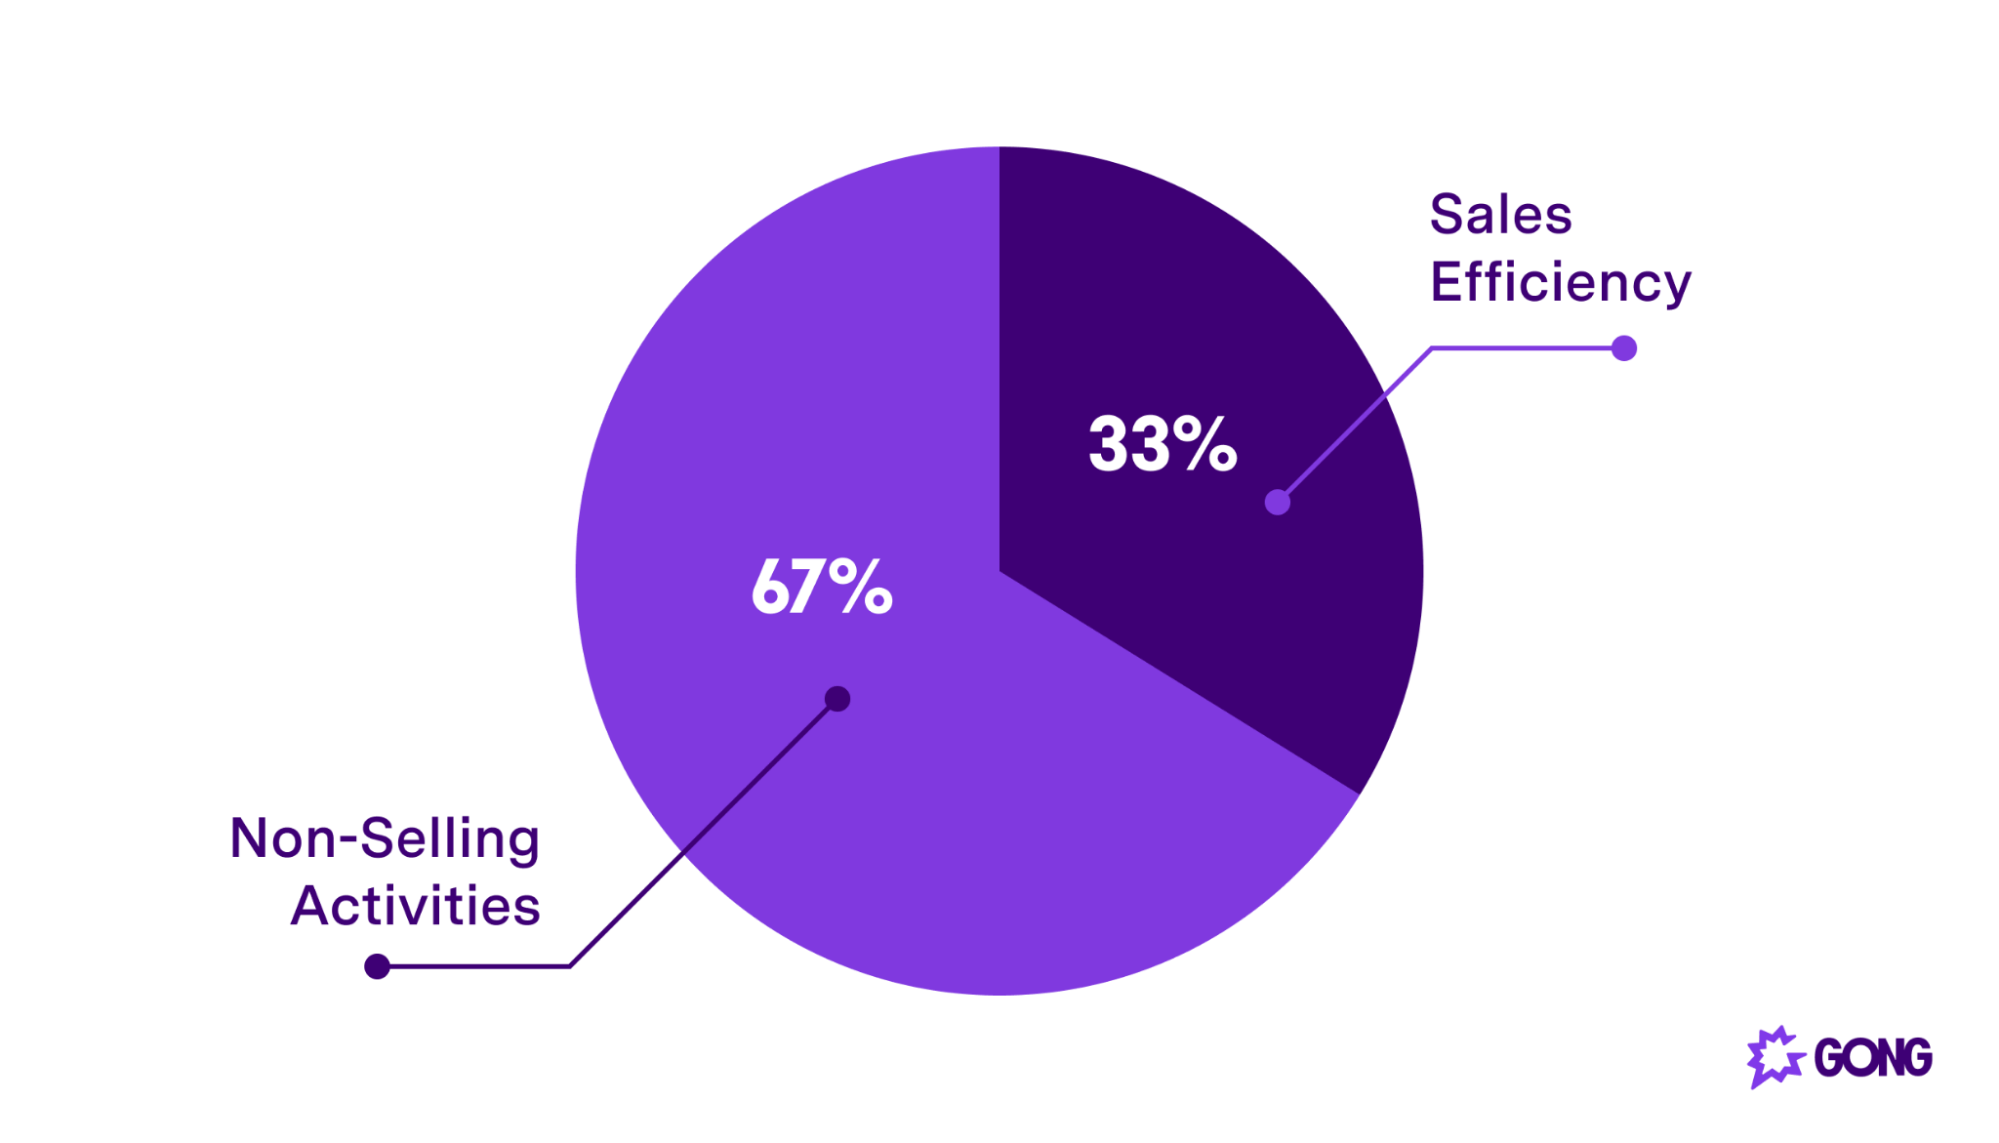 Reps spend most of their time on non-selling activities